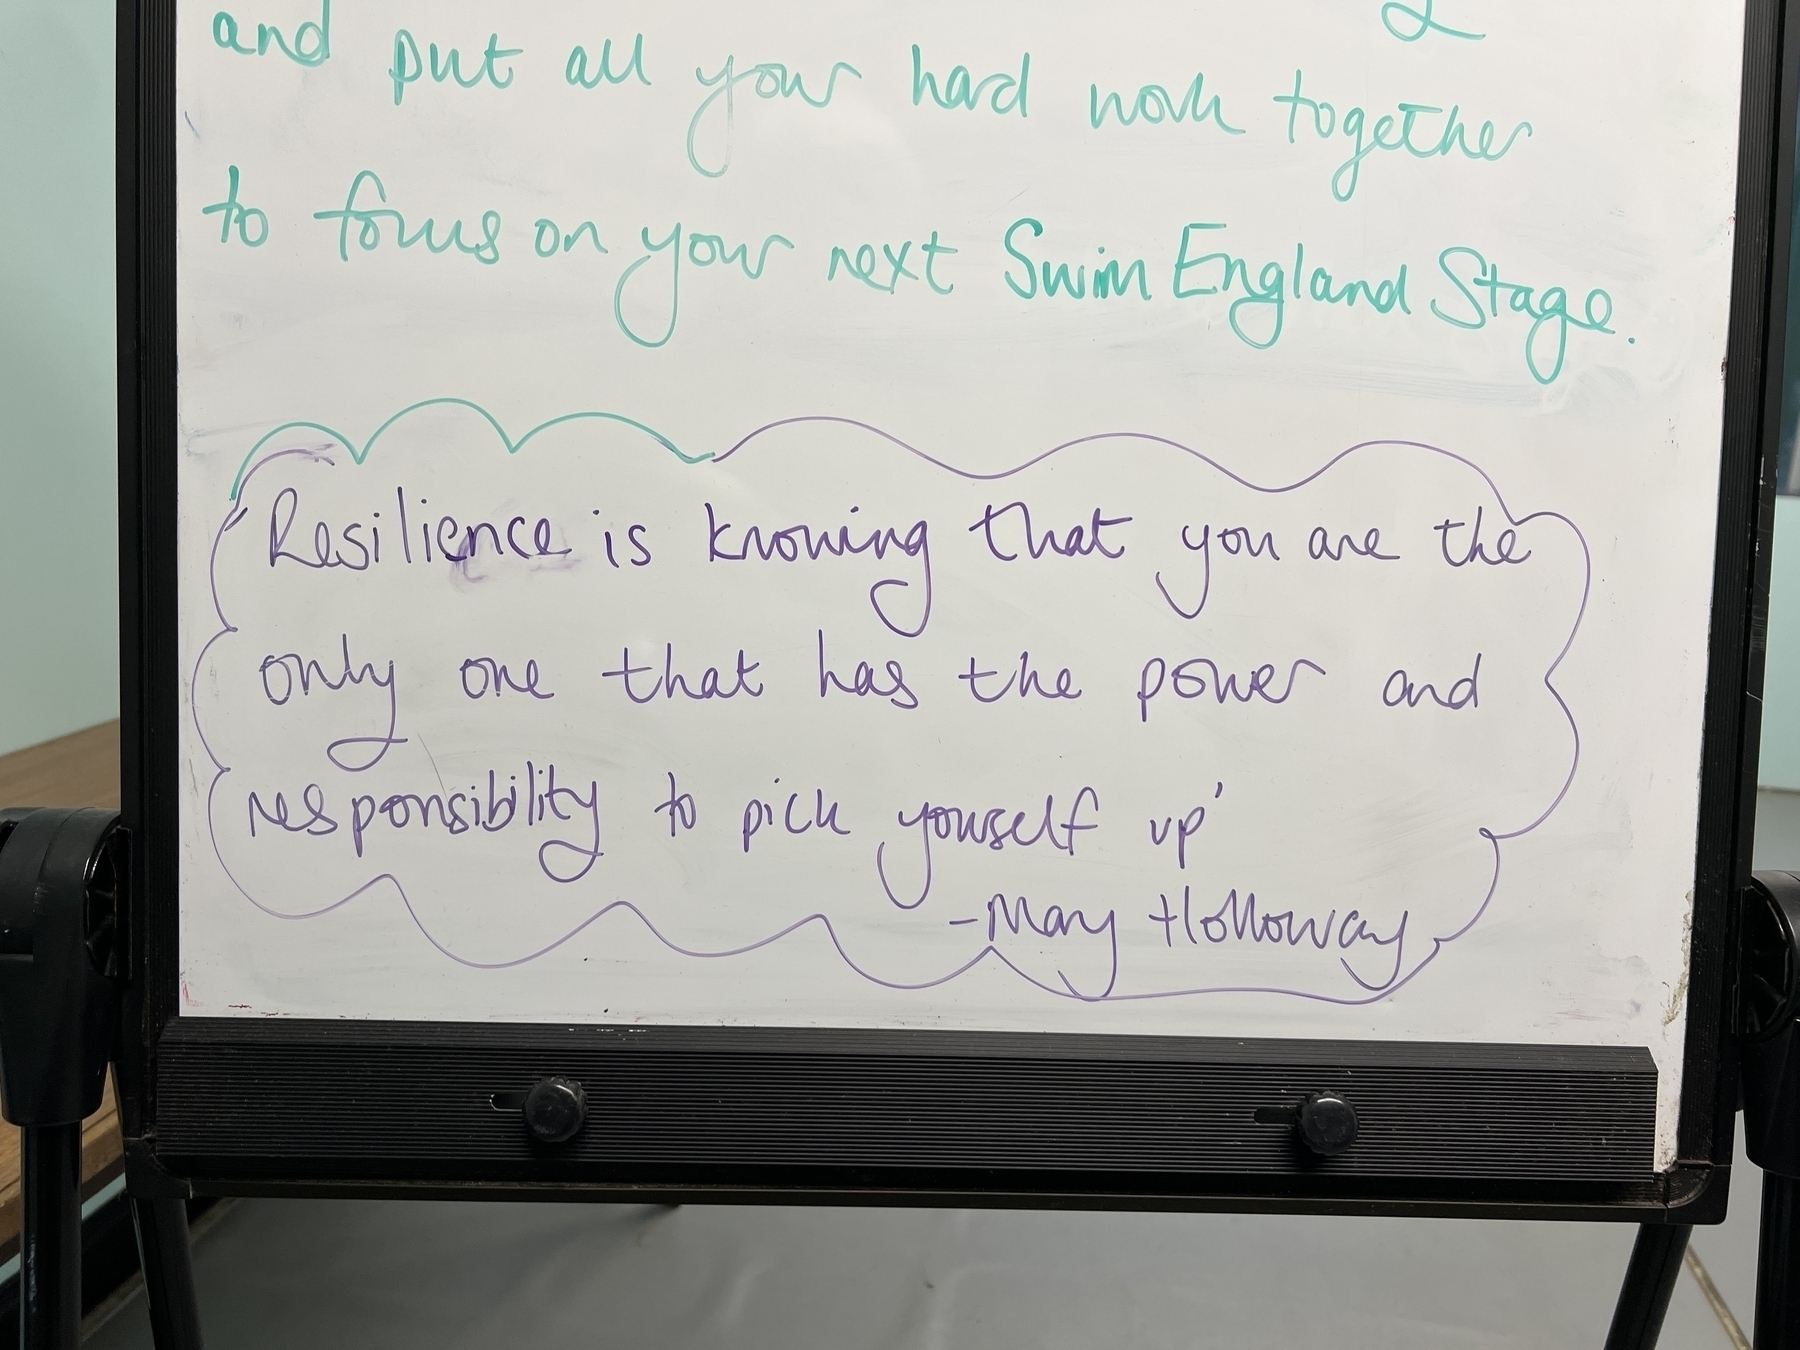 A whiteboard with the following written on it: “Resilience is knowing that you are the only one that has the power and responsibly to pick youself up&10;- May Holloway”